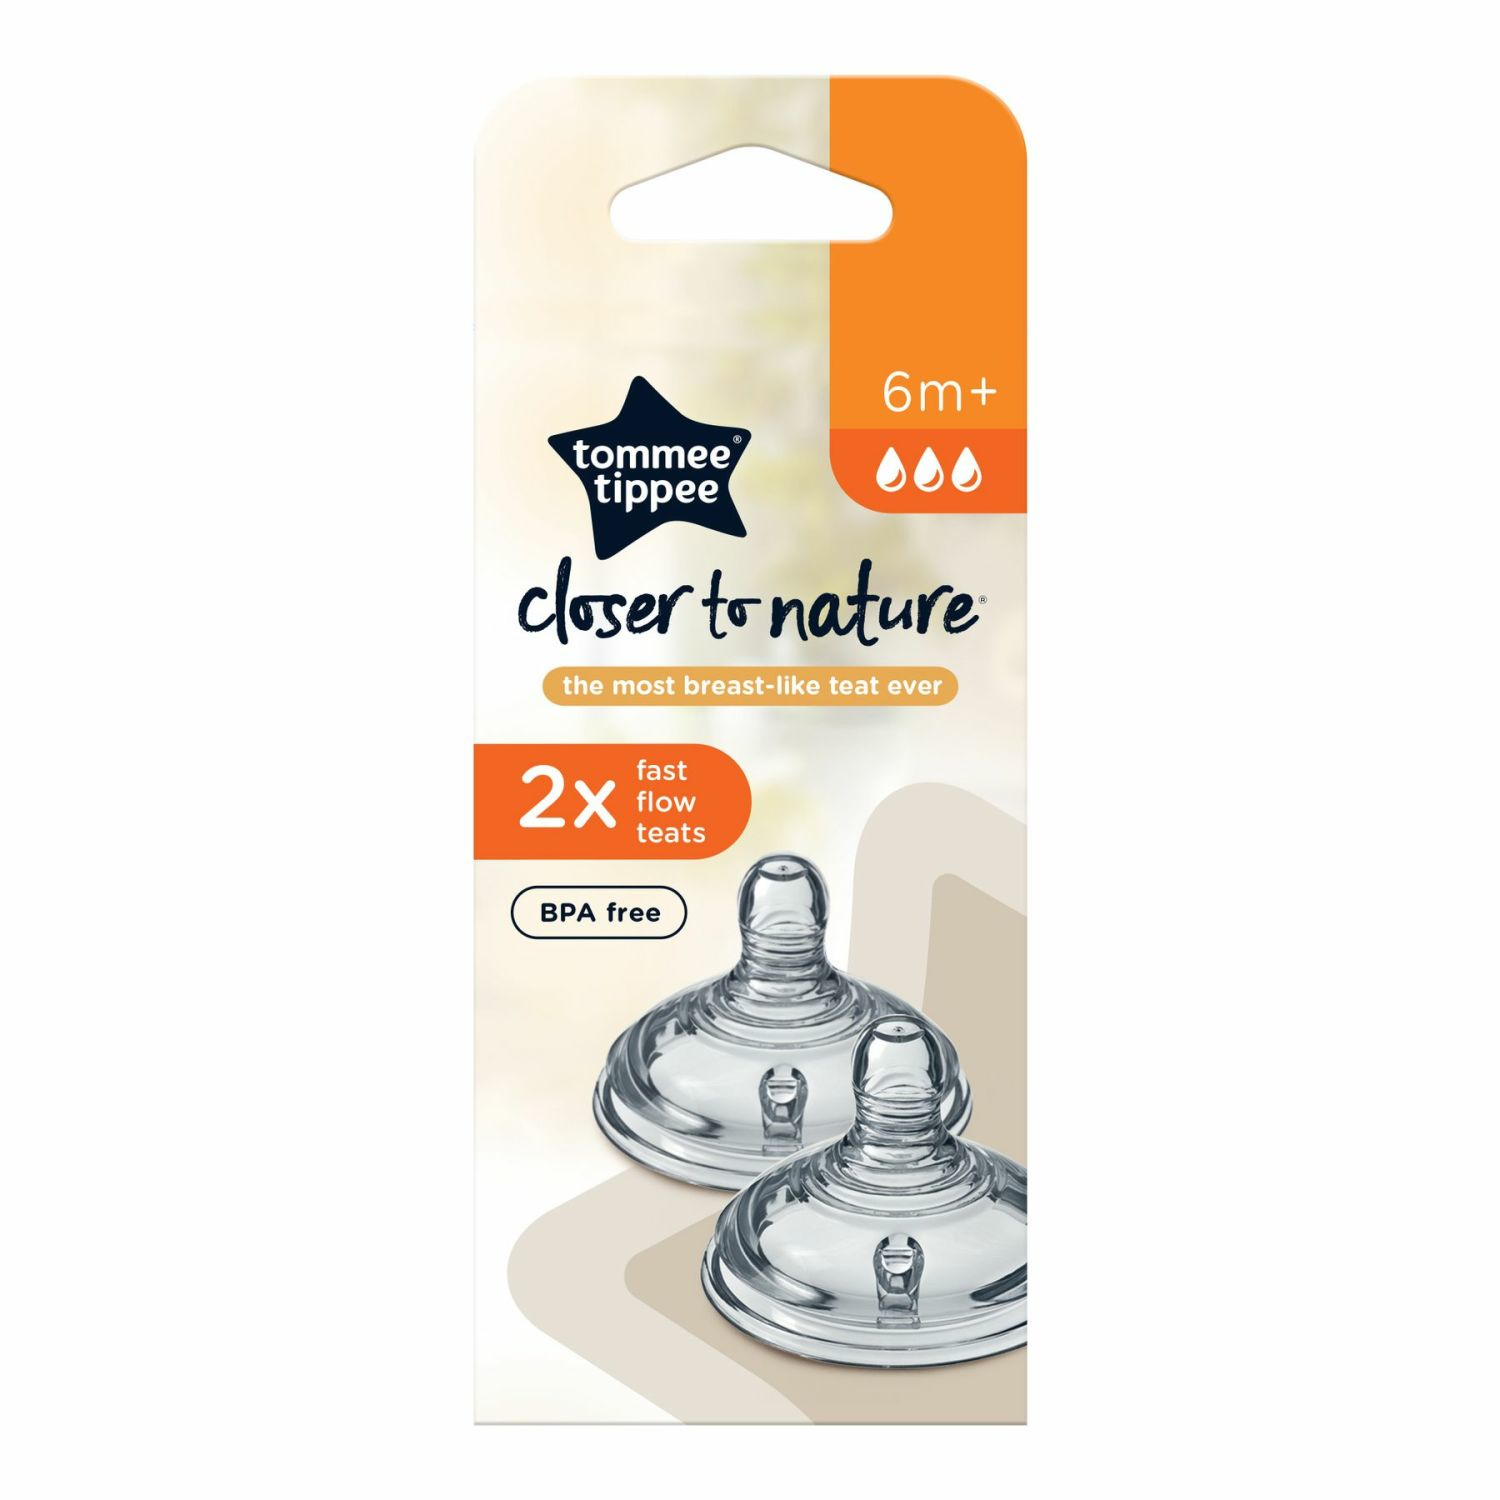 Tommee Tippee Closer to Nature Fast Flow Teats, 2 Each